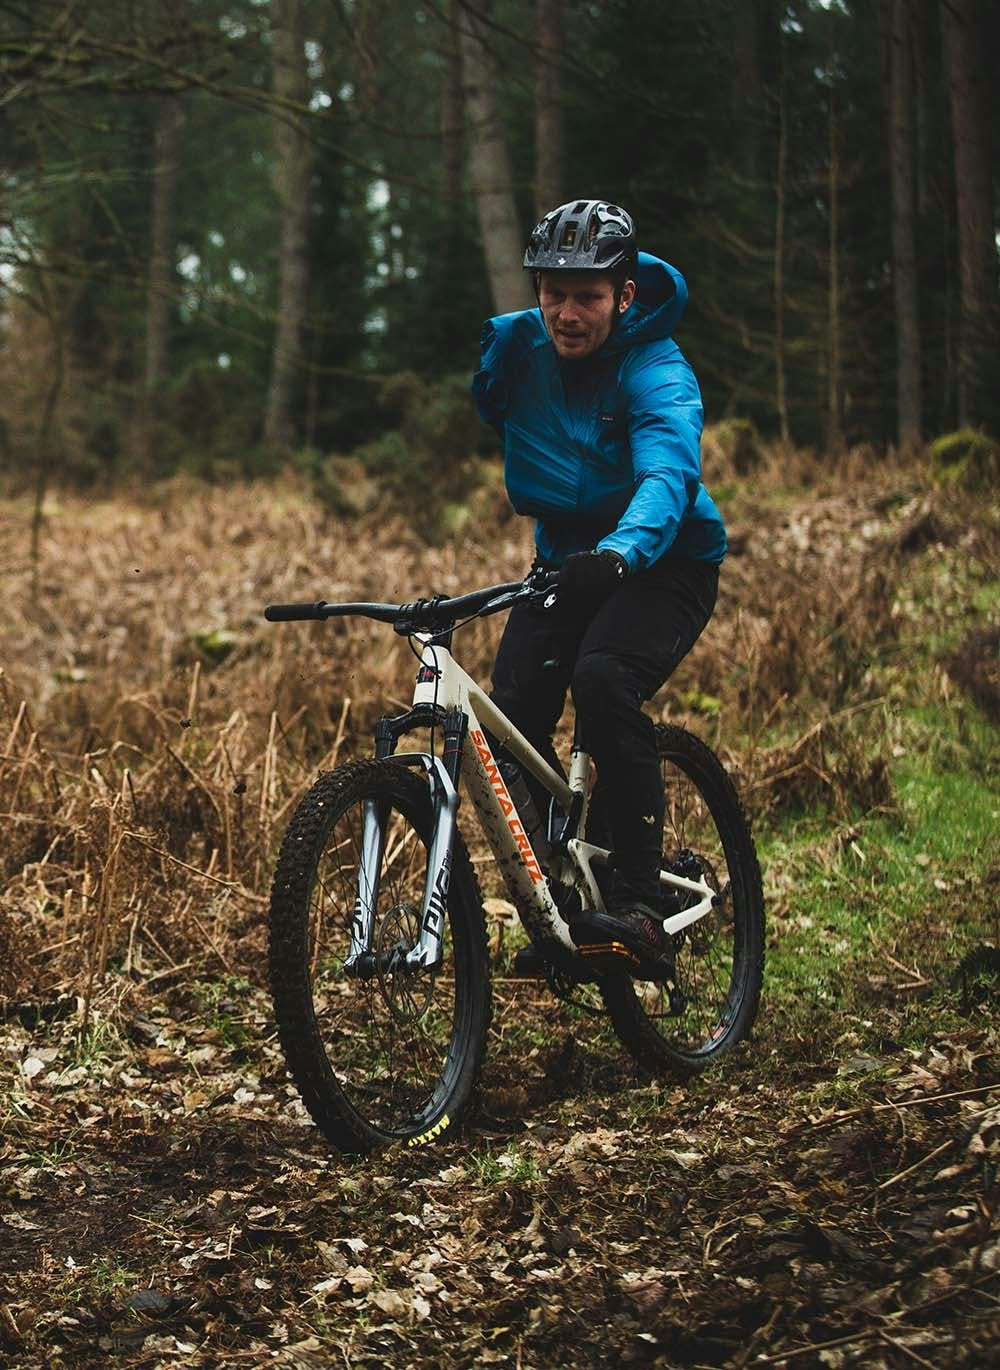 Tommy Wilkinson riding his modified Tallboy mountain bike